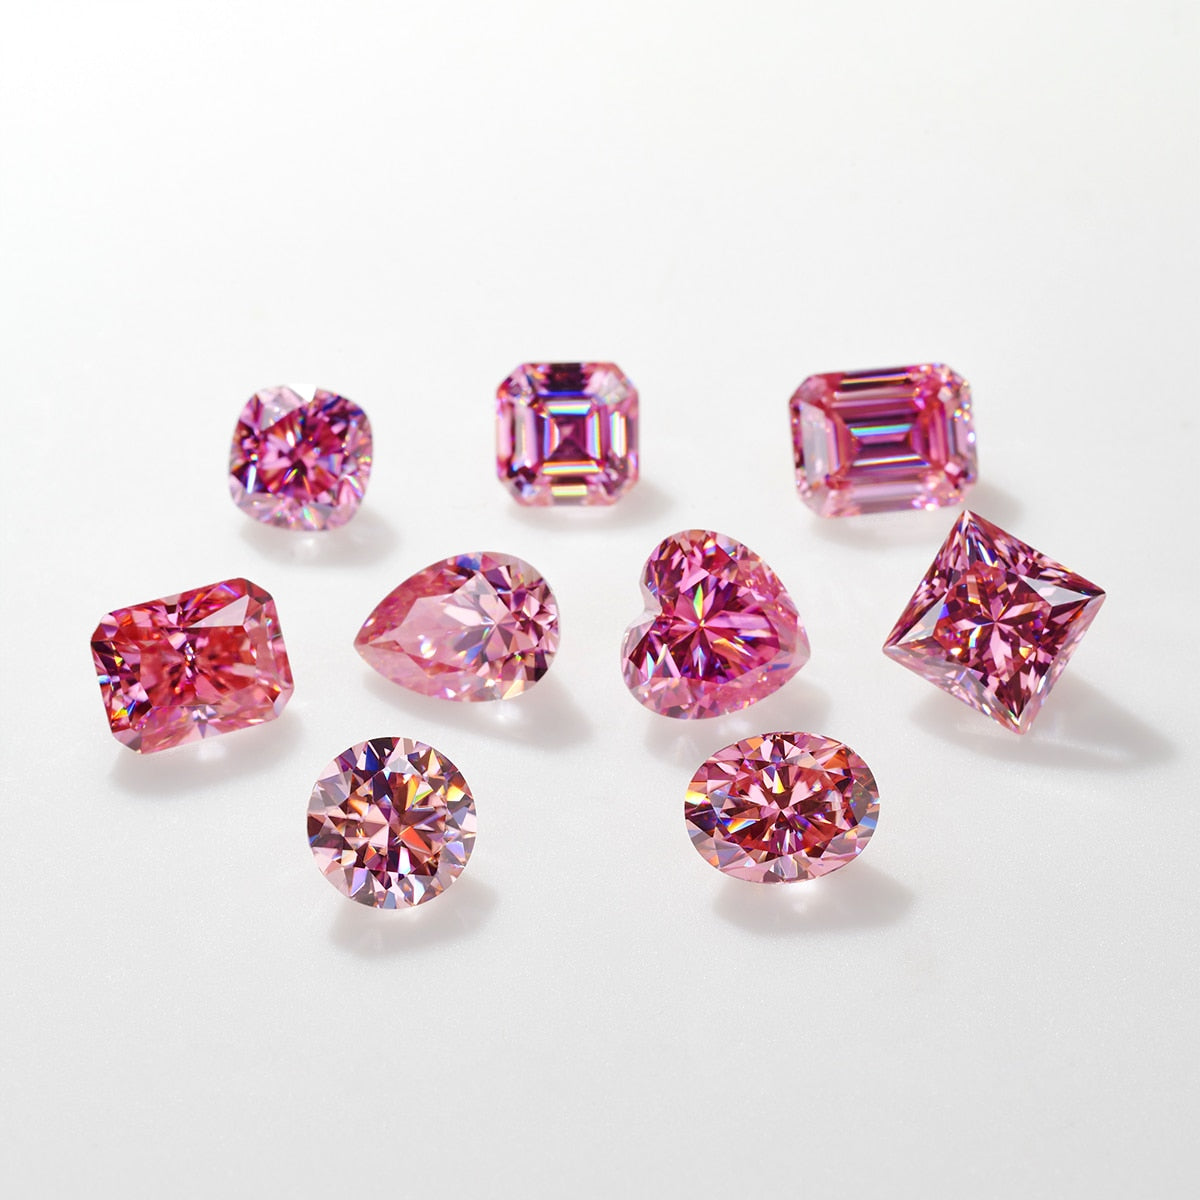 Pink Moissanite. With Certificate. Heart and Round Shape Gemstones.